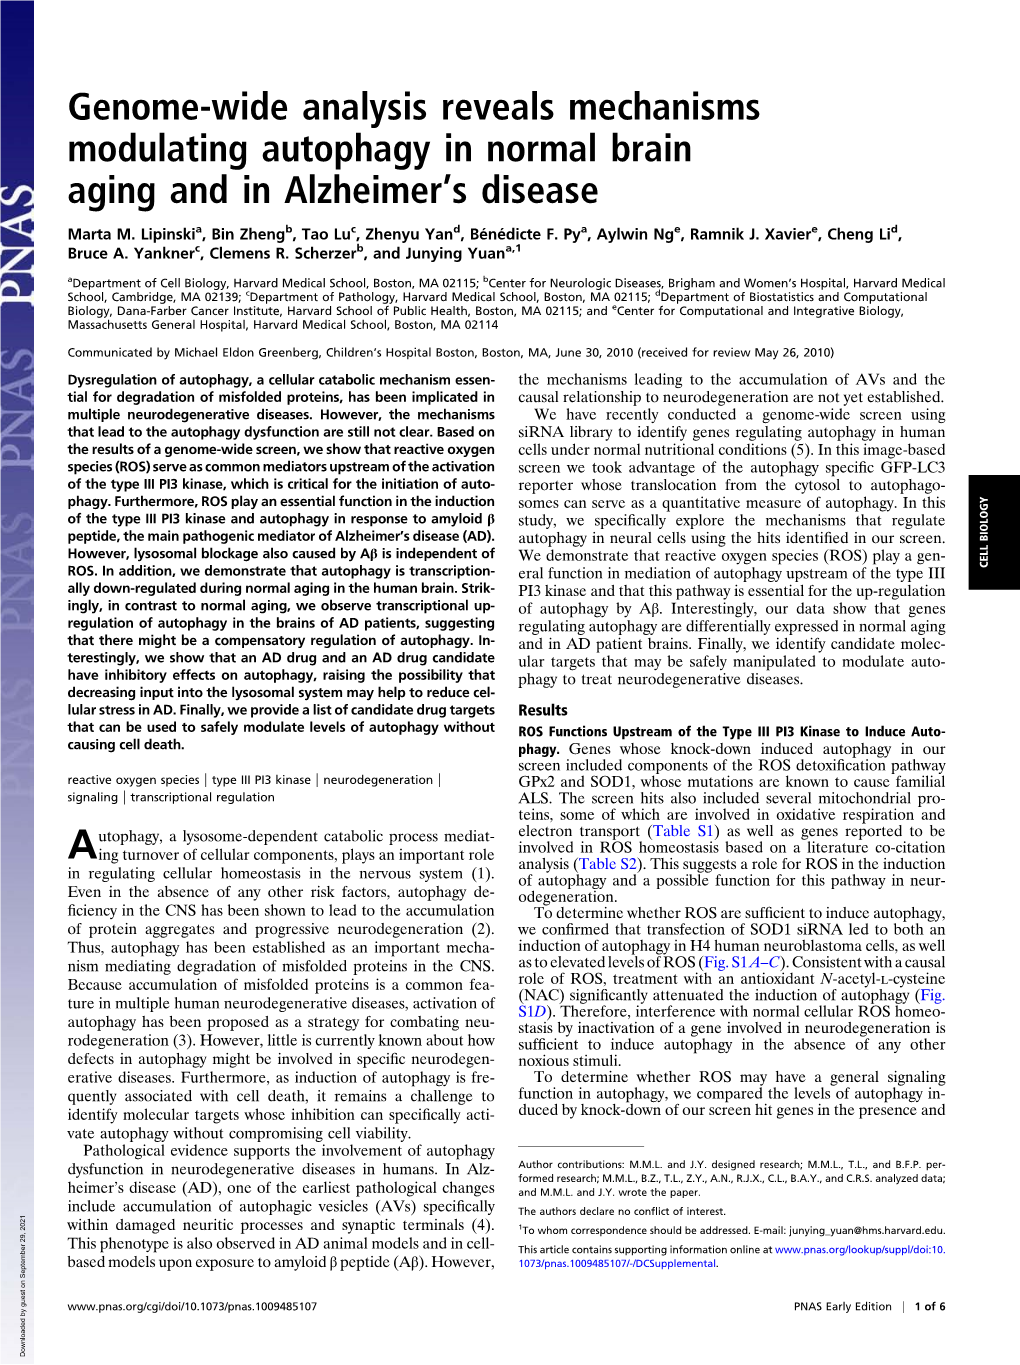 Genome-Wide Analysis Reveals Mechanisms Modulating Autophagy in Normal Brain Aging and in Alzheimerts Disease